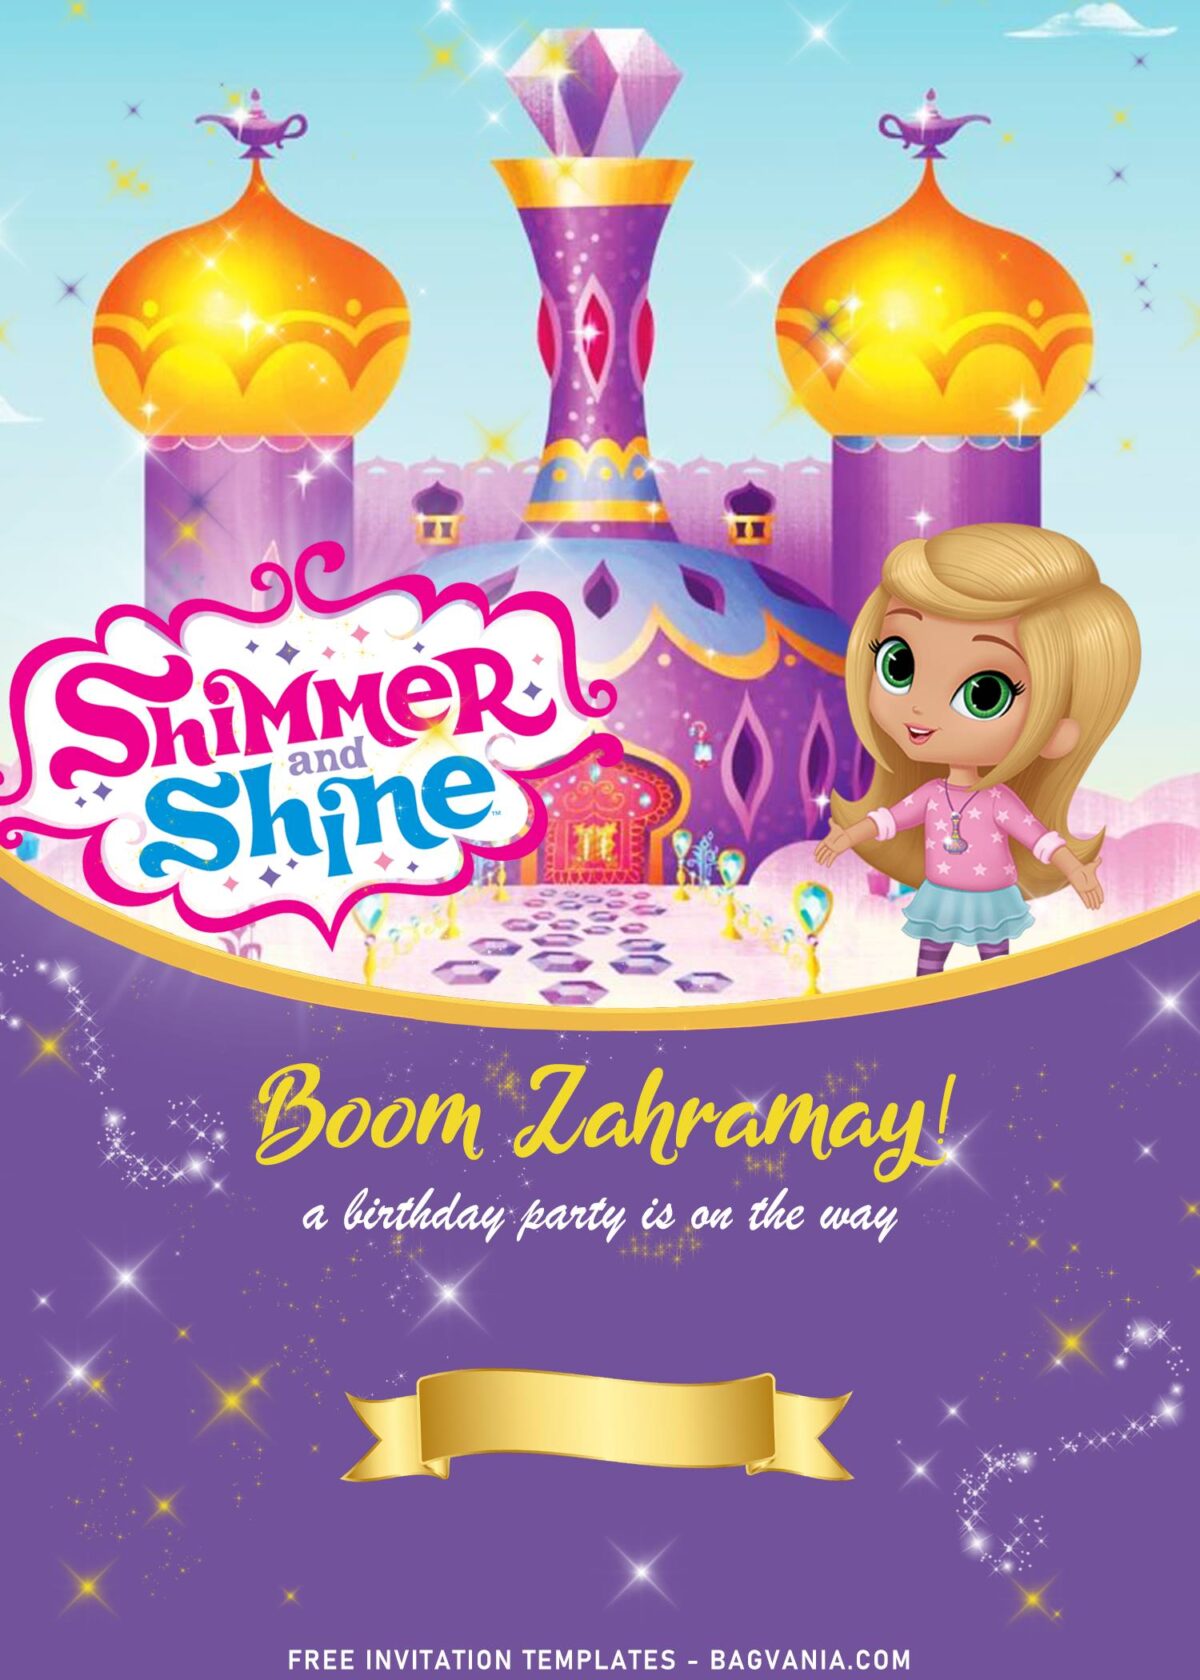 7+ Shimmer And Shine Birthday Invitation Templates with beautiful Arabian Mosque building